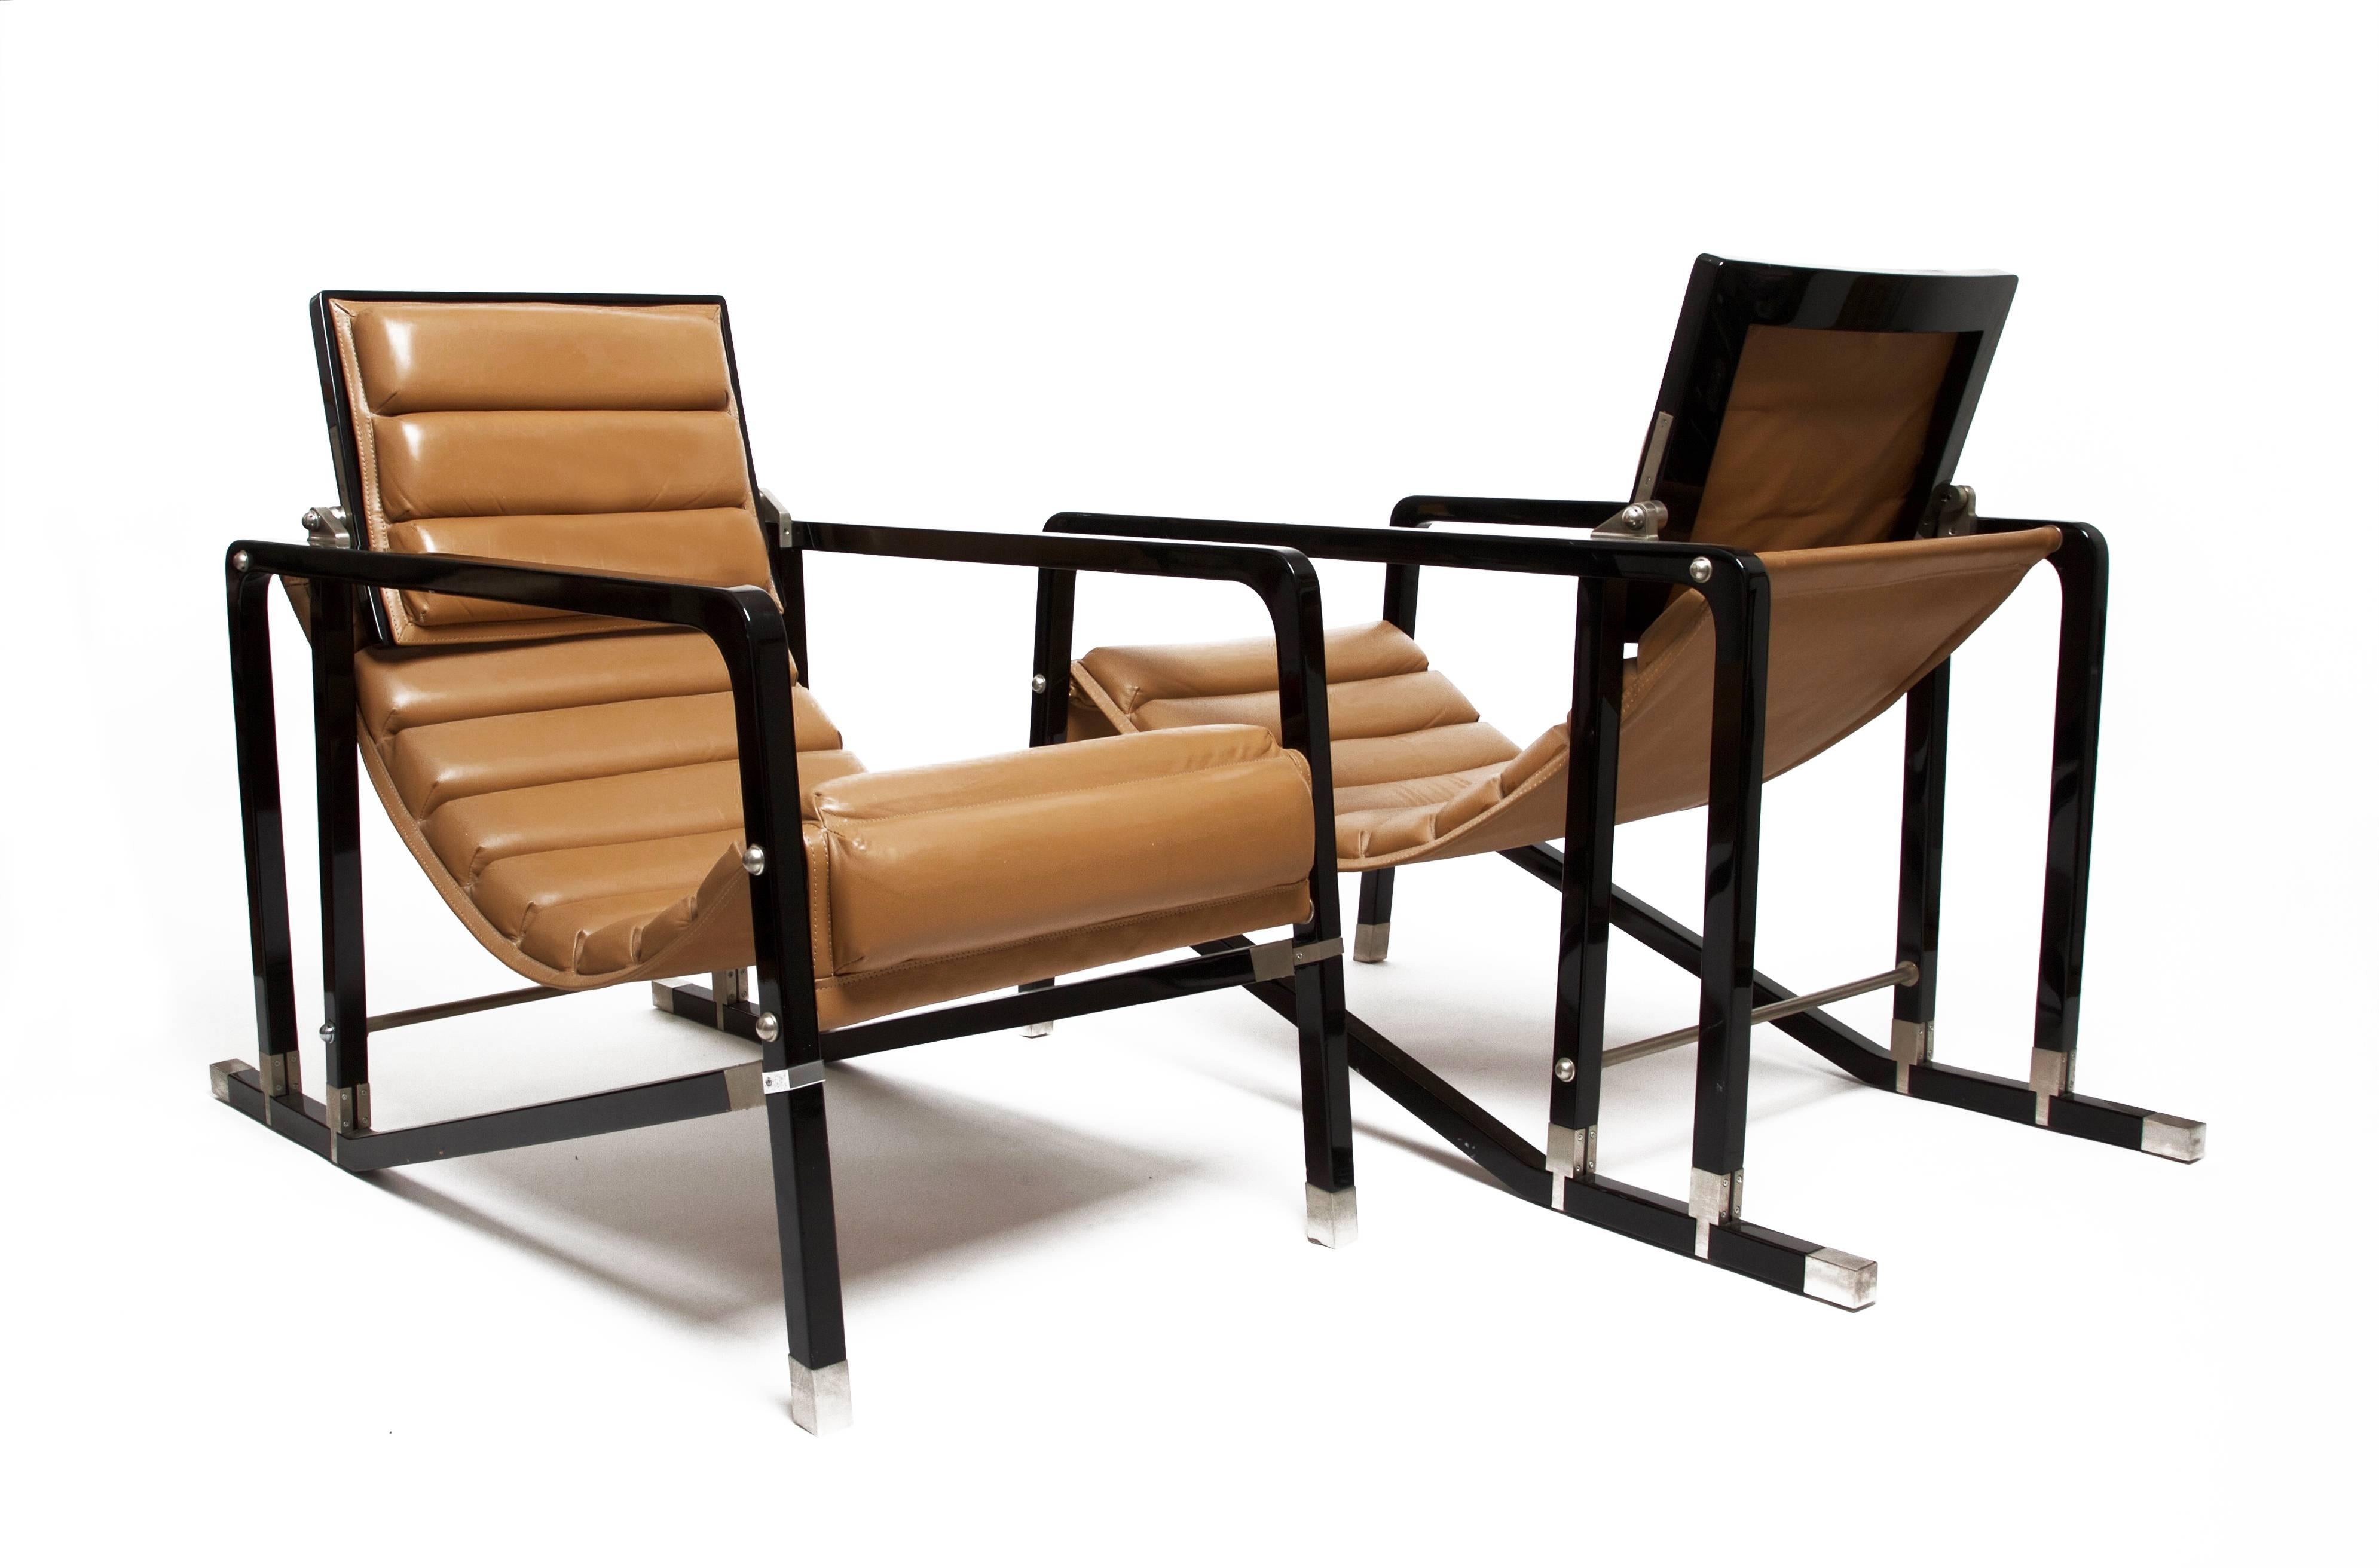 Eileen gray (1879-1976). 
Pair of "Transat" chairs. 
First edition by Andrée Putman for Ecart International, France, 1978. 
Black lacquered wood, brushed metal, leather. 
Excellent condition. 

Model designed by Eileen Gray in 1927